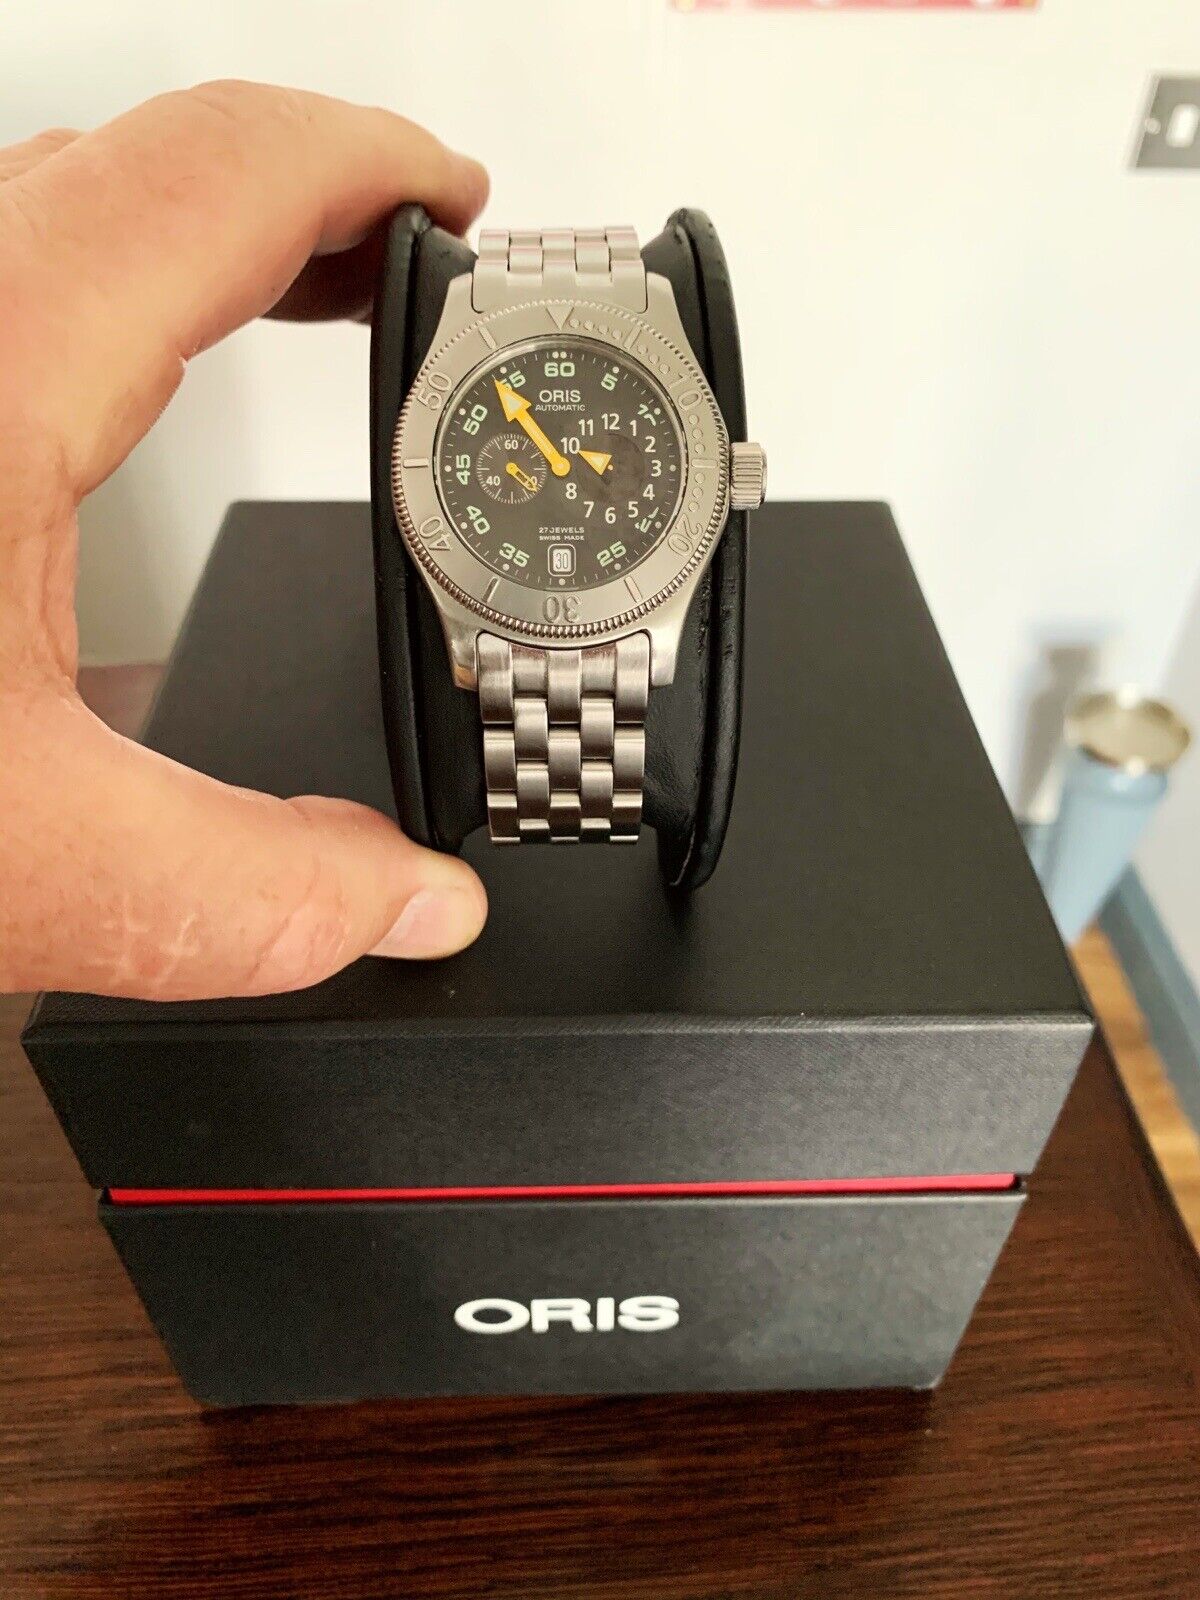 Click image for more details on this Oris Divers Watch - eBay UK